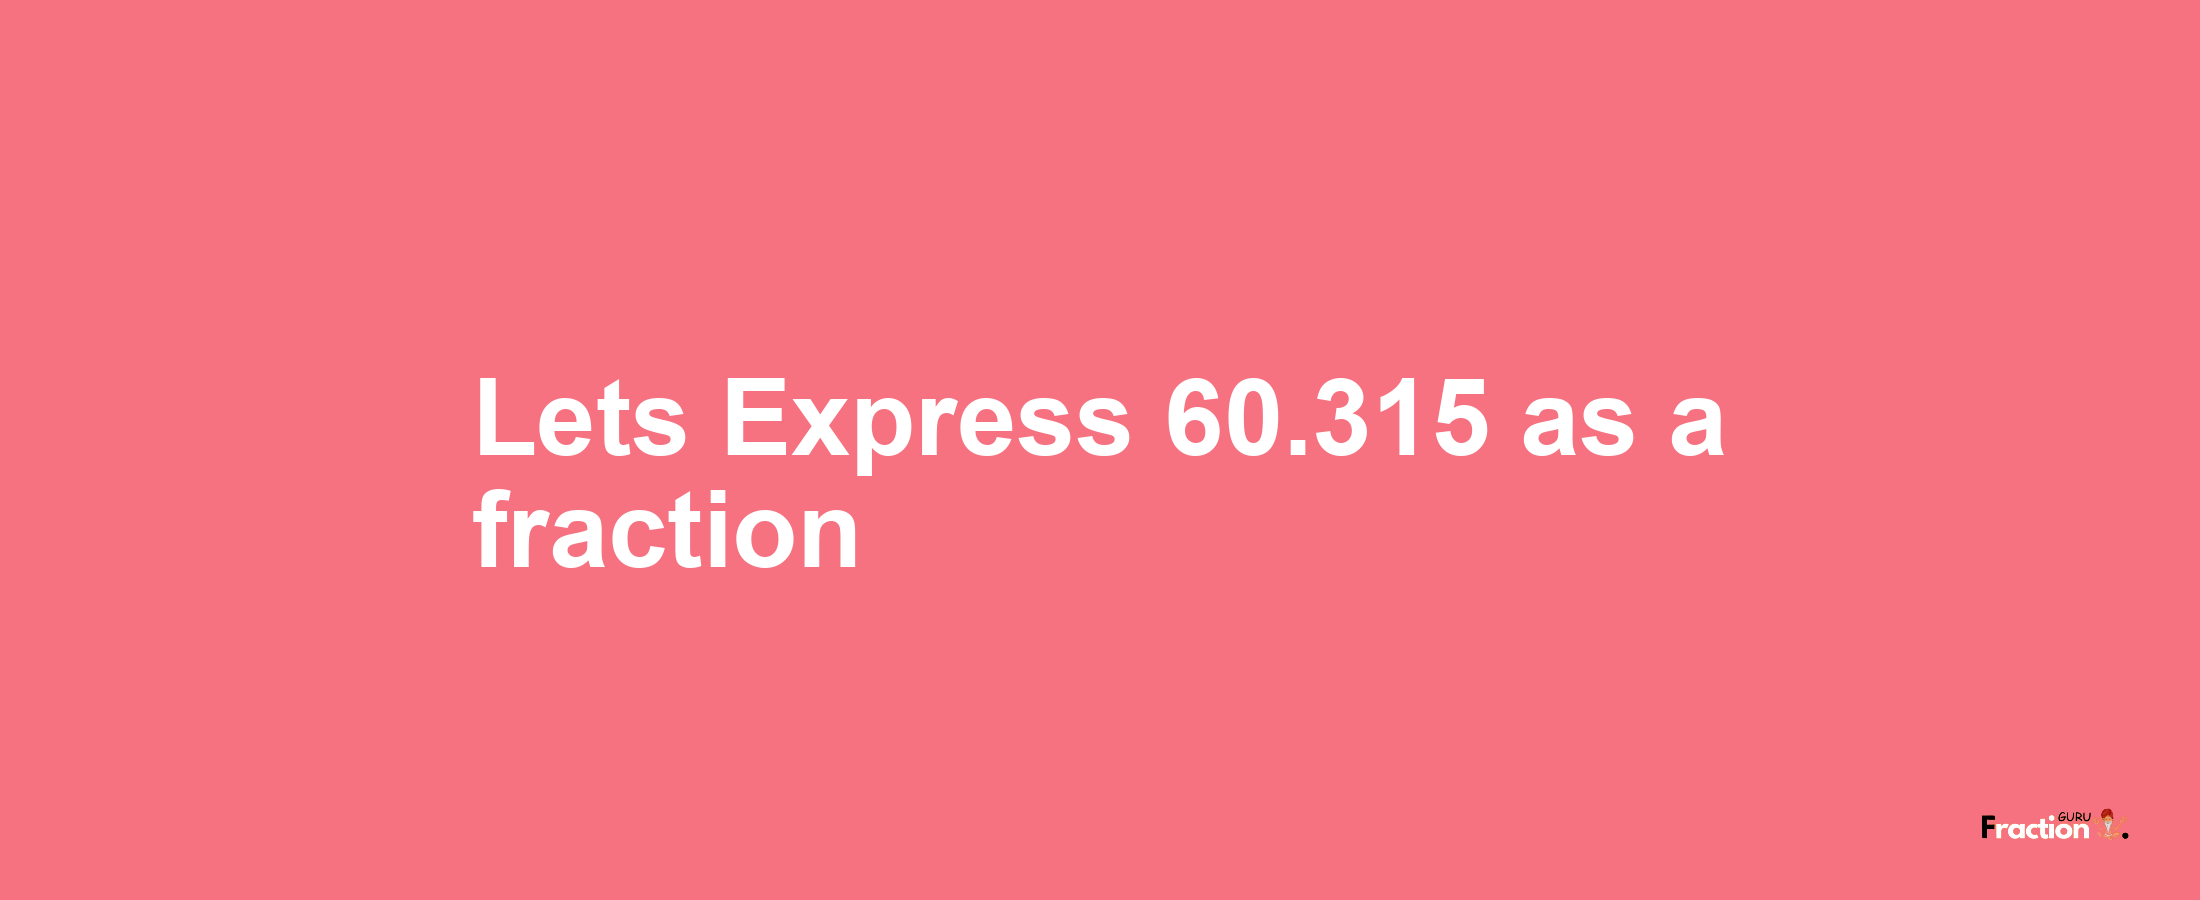 Lets Express 60.315 as afraction